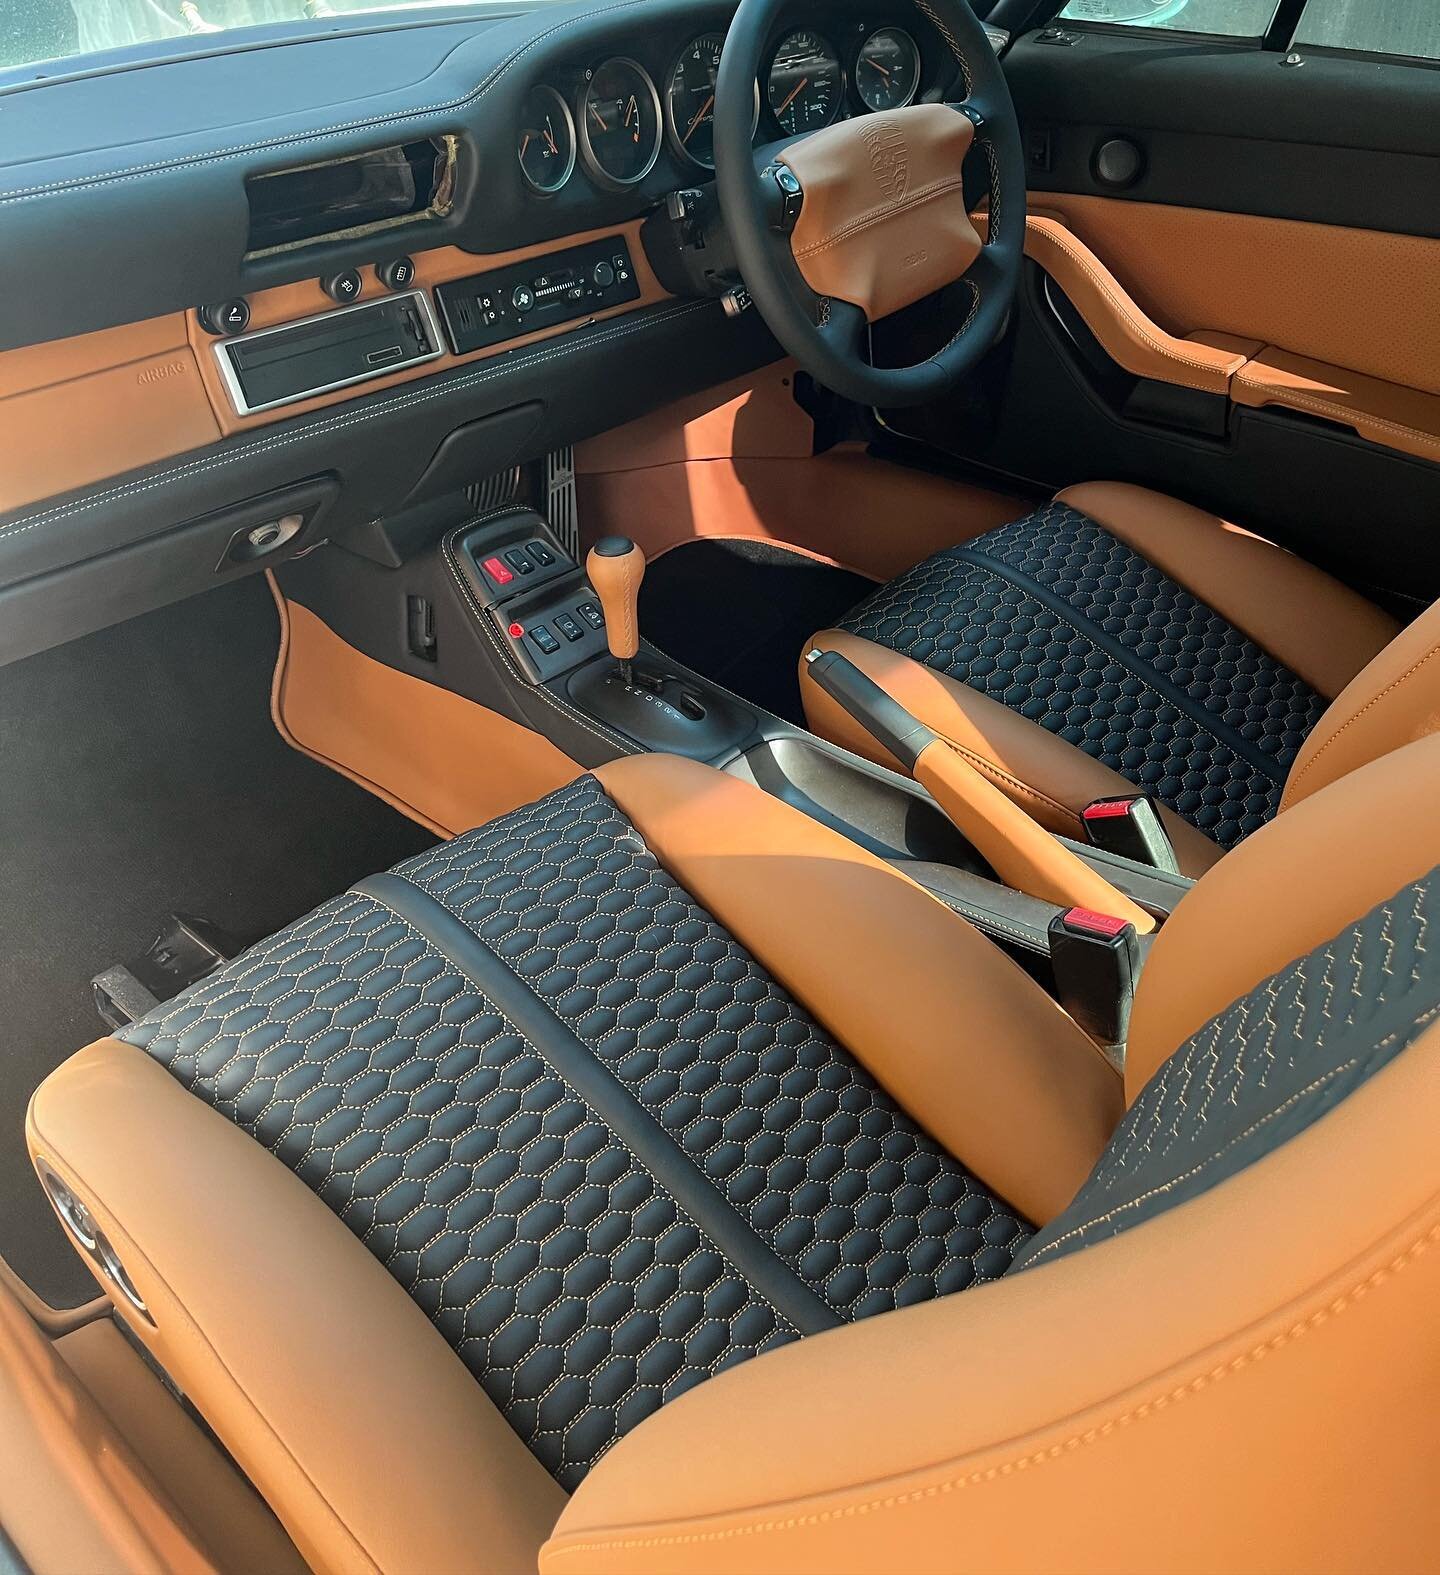 How&rsquo;s this combo 👌👌 your interior can look like this too&hellip; just ask us how. #leather #leatherupholstery #leatherinterior #customleather #carseat #luxury #car #cars #autoupholstery